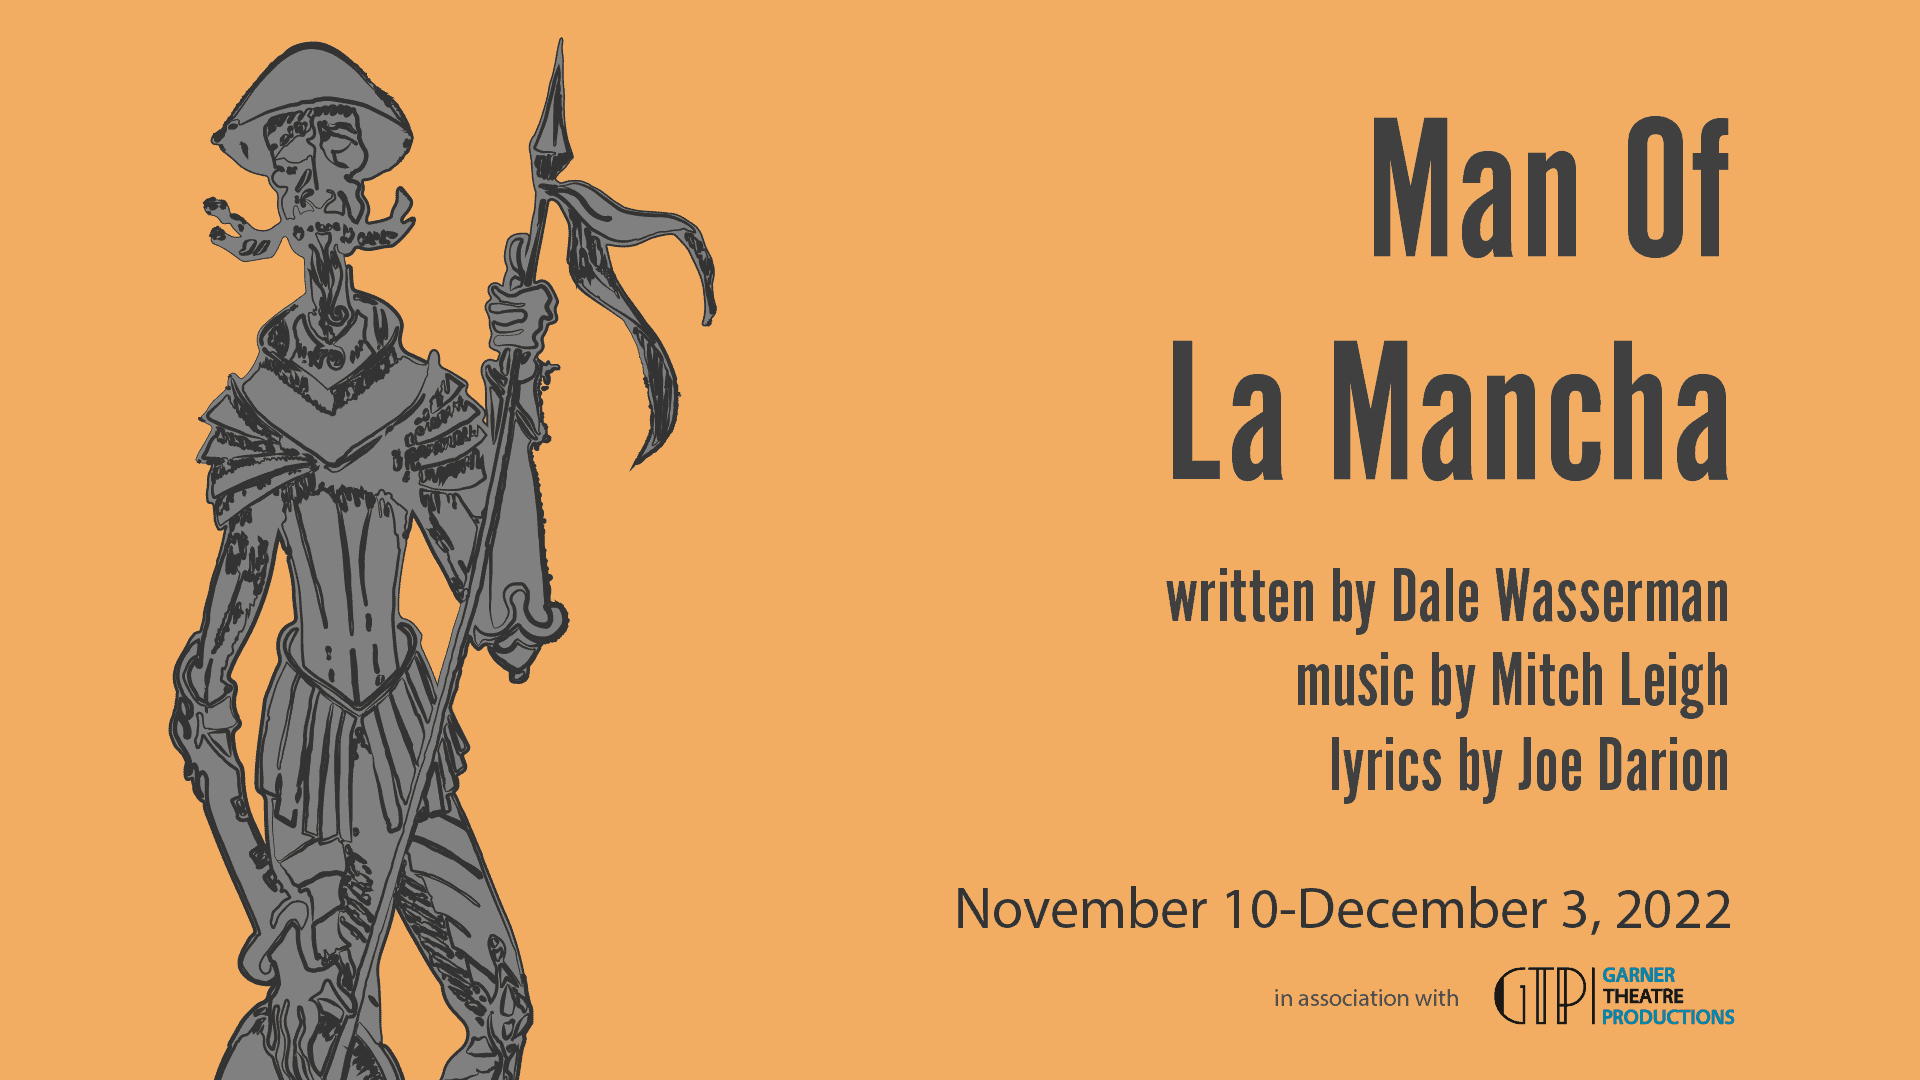 Next up is the Broadway musical MAN OF LA MANCHA by Dale Wasserman, Mitch Leigh, and Joe Darion. One of the most enduring works of musical theatre, MAN OF LA MANCHA was last staged by Magnus Theatre over 40 years ago. Running from November 10th to December 3rd, this play within a play is the story of a man who seeks decency and beauty (The Impossible Dream) in an increasingly cynical world. 
<br><br>